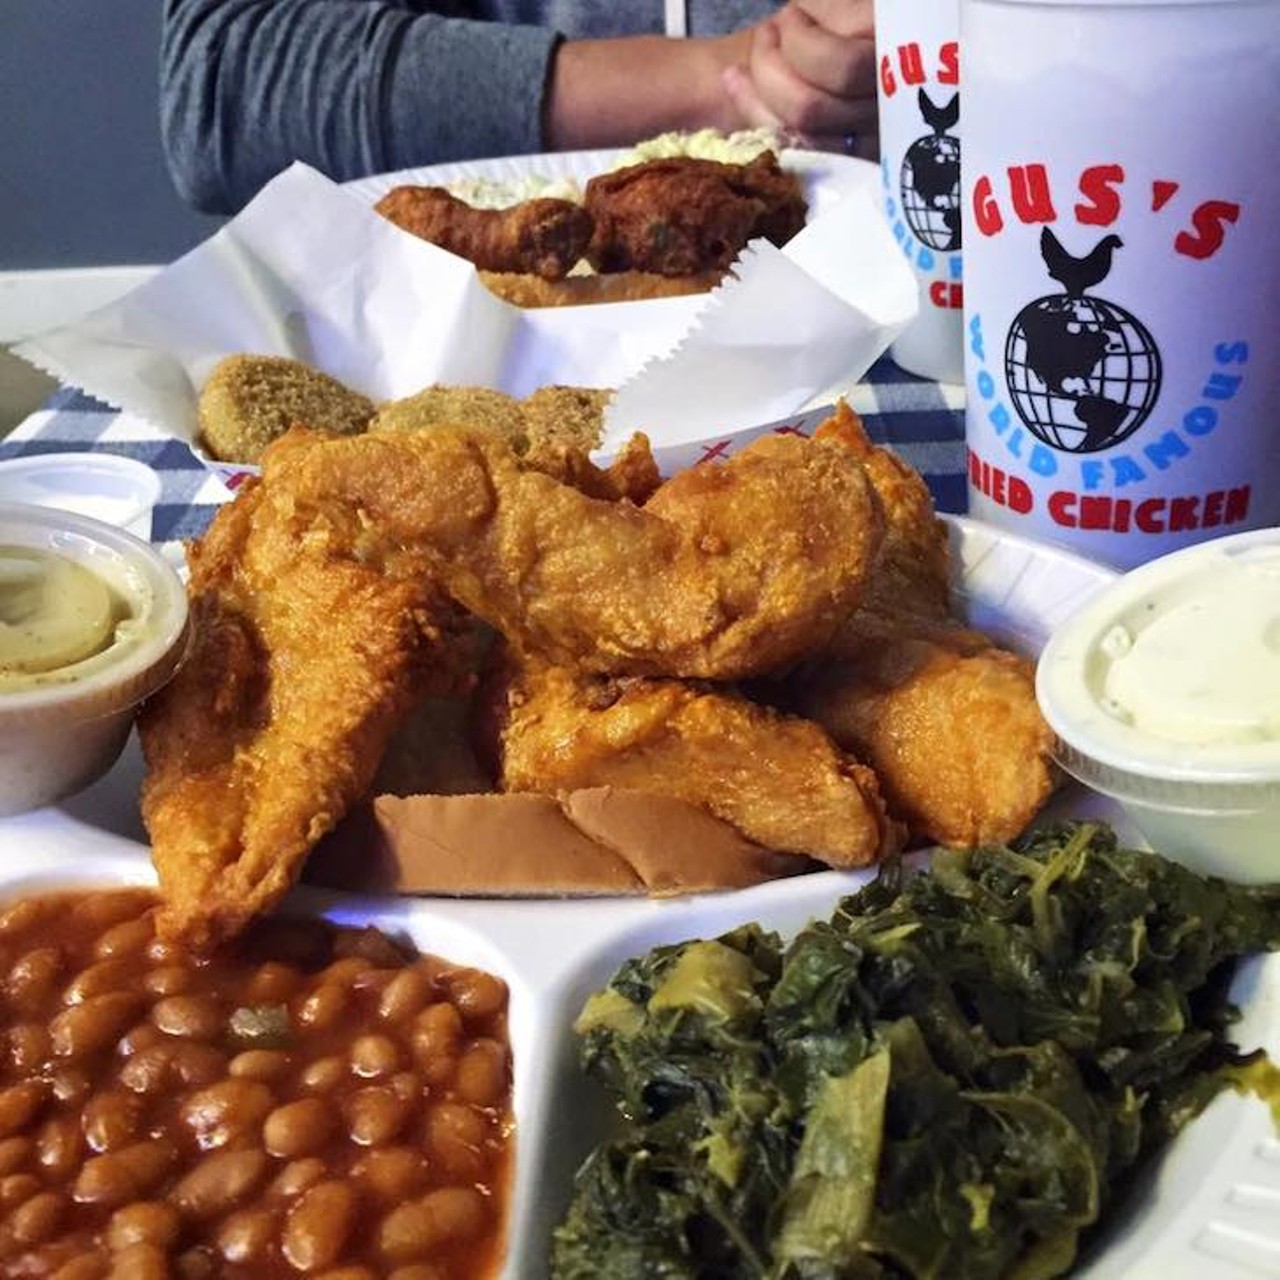 Gus's World Famous Fried Chicken 
Gus's promises that its fried chicken is simply the best on the planet ... but we wouldn't know unless we traveled to one of its myriad locations sprinkled throughout the Deep South. 
Photo via Facebook (Verdelicias)